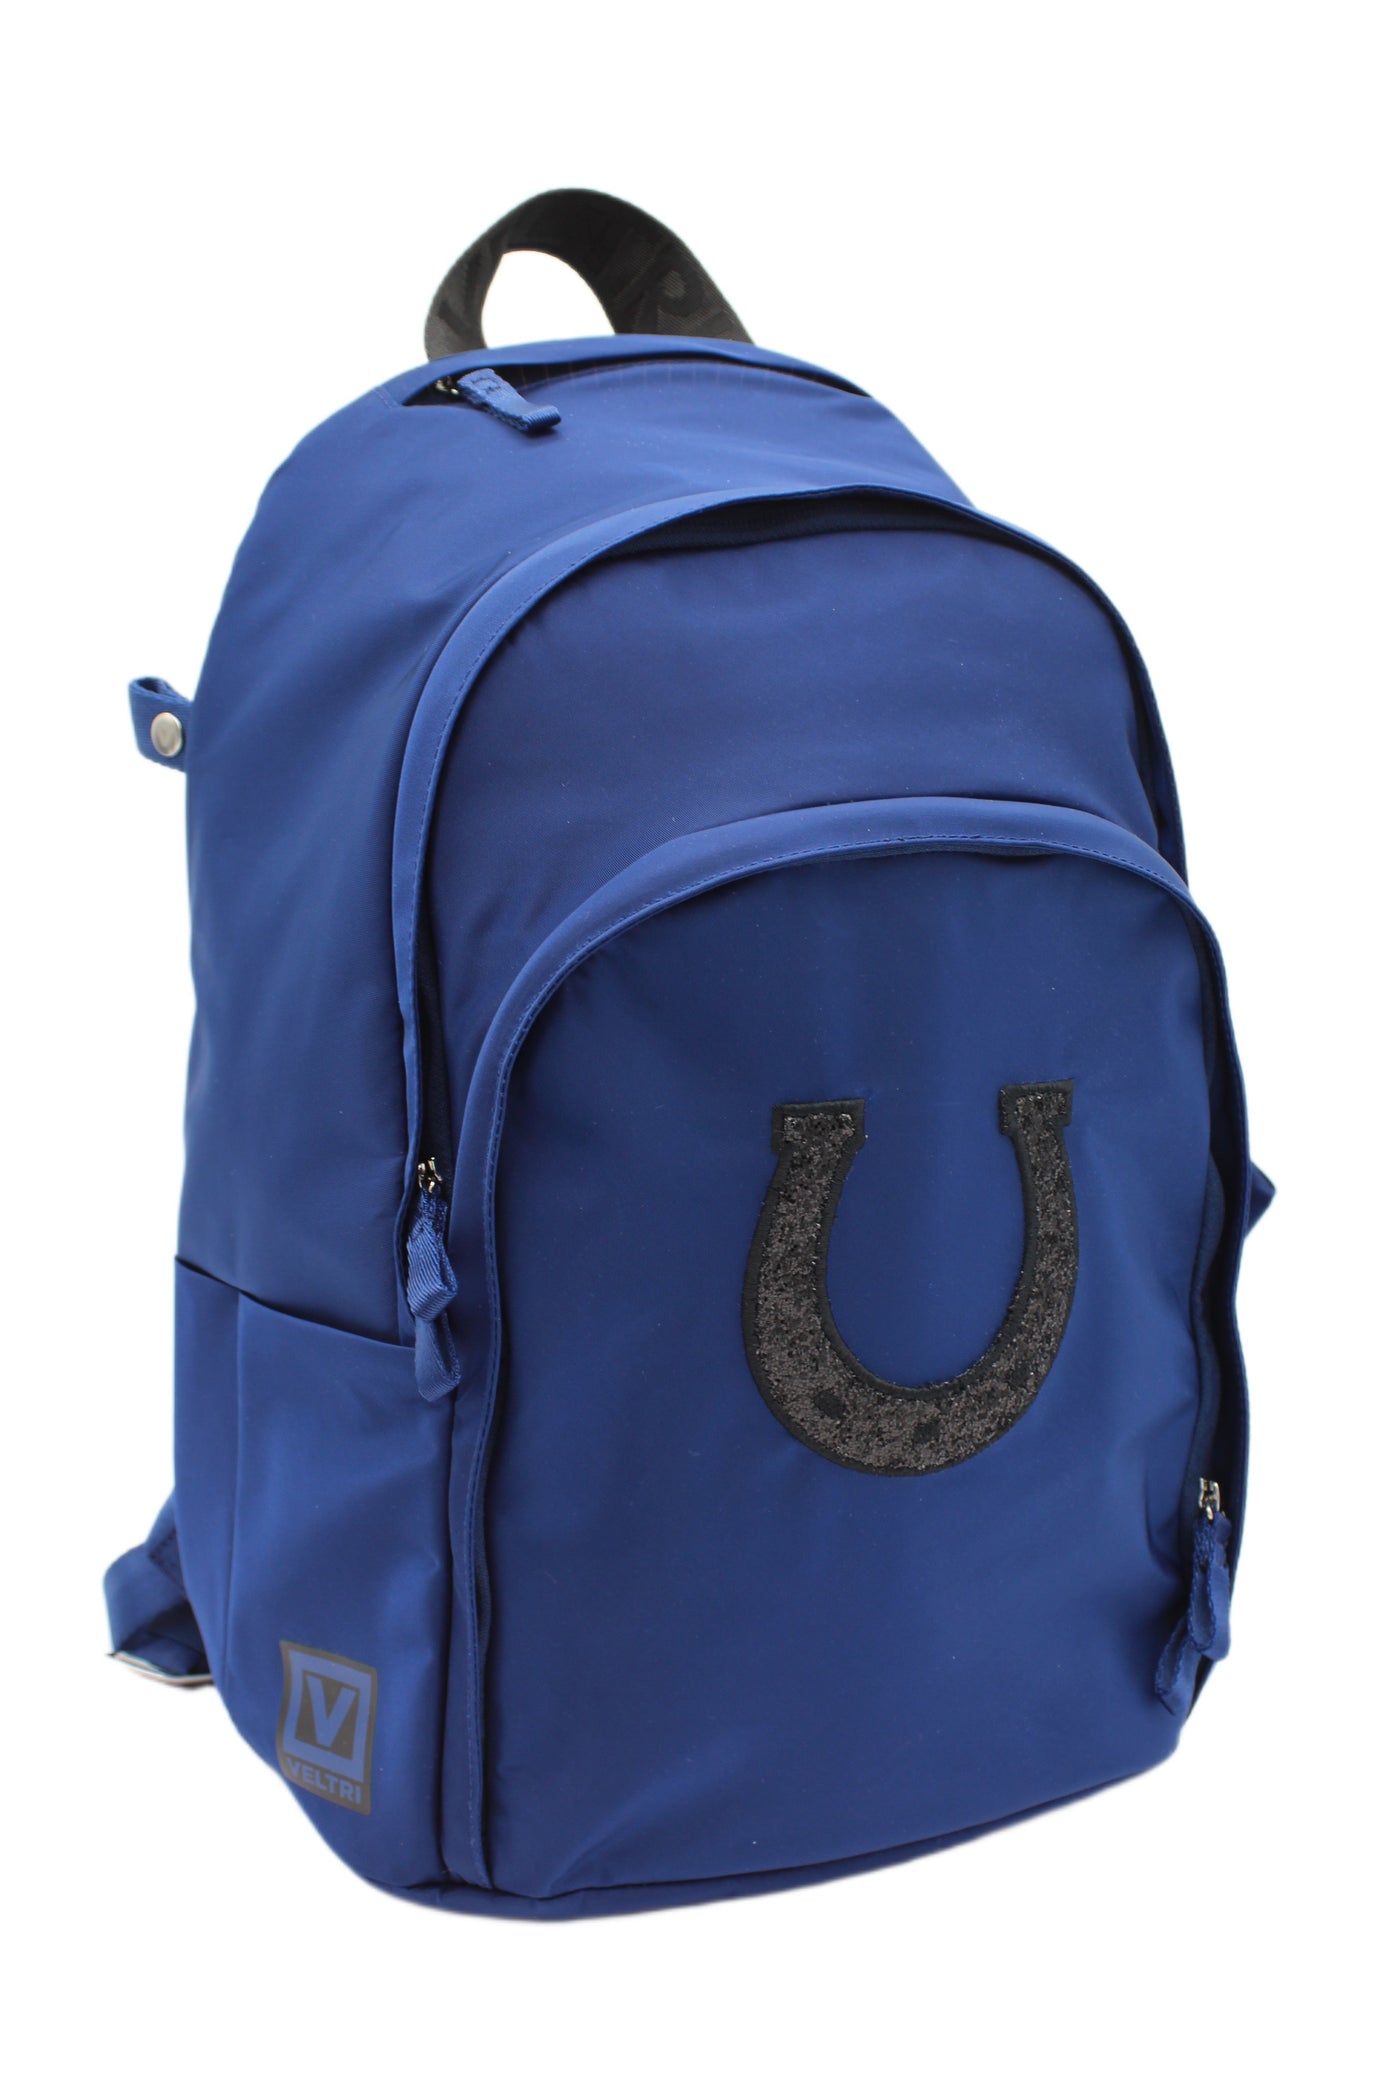 Novelty Delaire Backpack - “Horse Shoe” (custom embroidered - allow an additional 5 business days to ship)